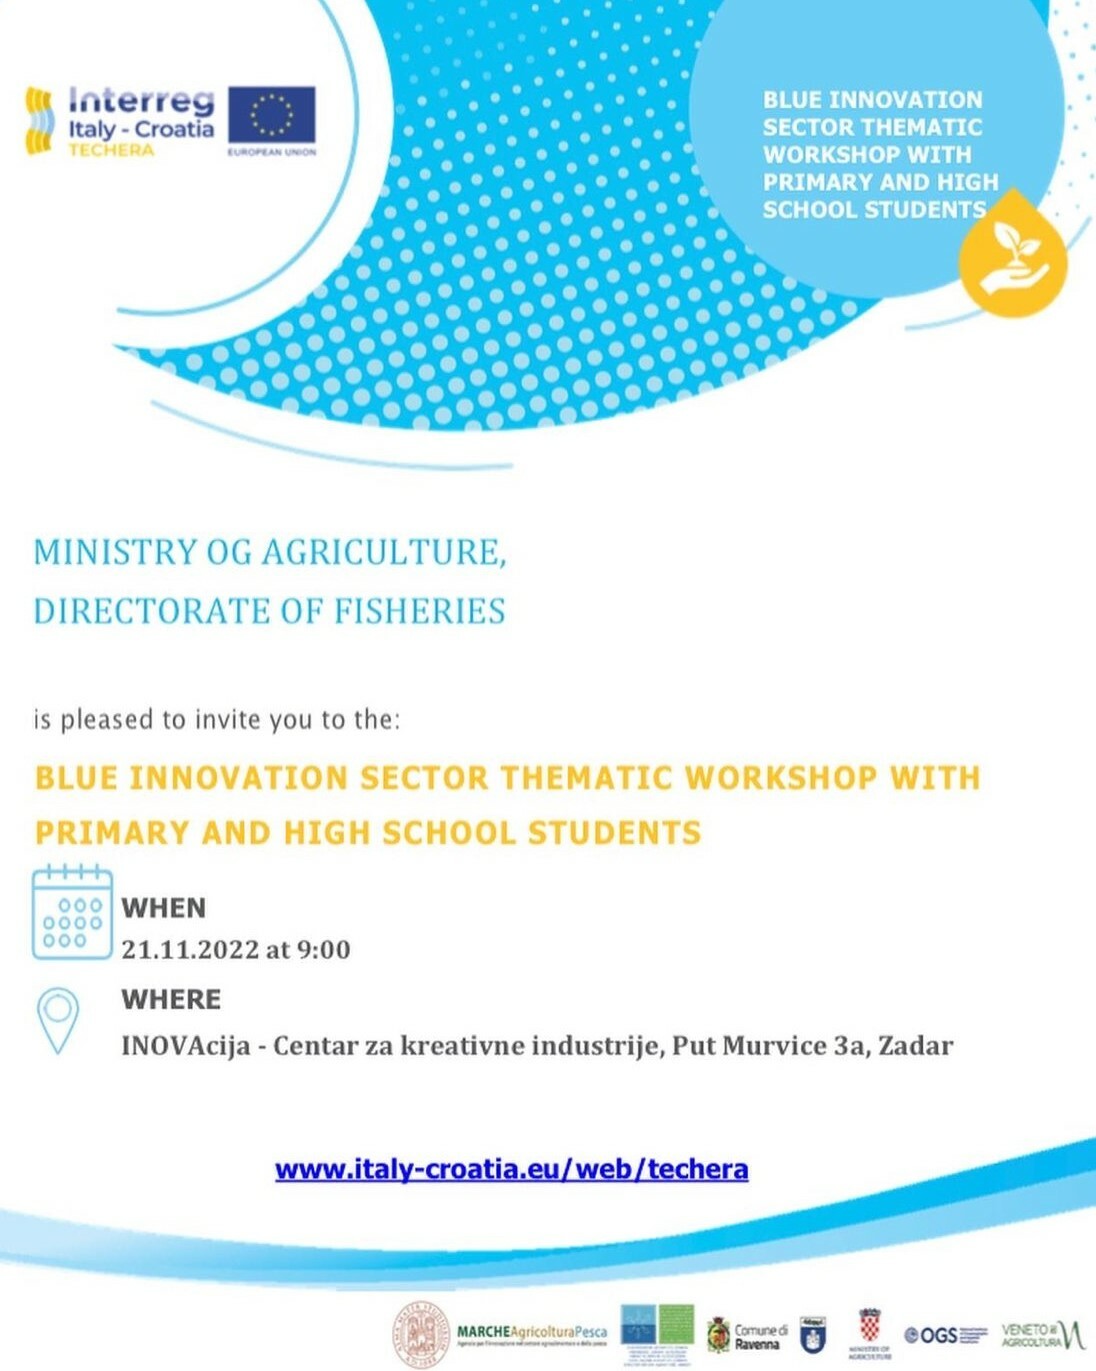 BLUE INNOVATION SECTOR THEMATIC WORKSHOP WITH PRIMARY AND HIGH SCHOOL STUDENTS